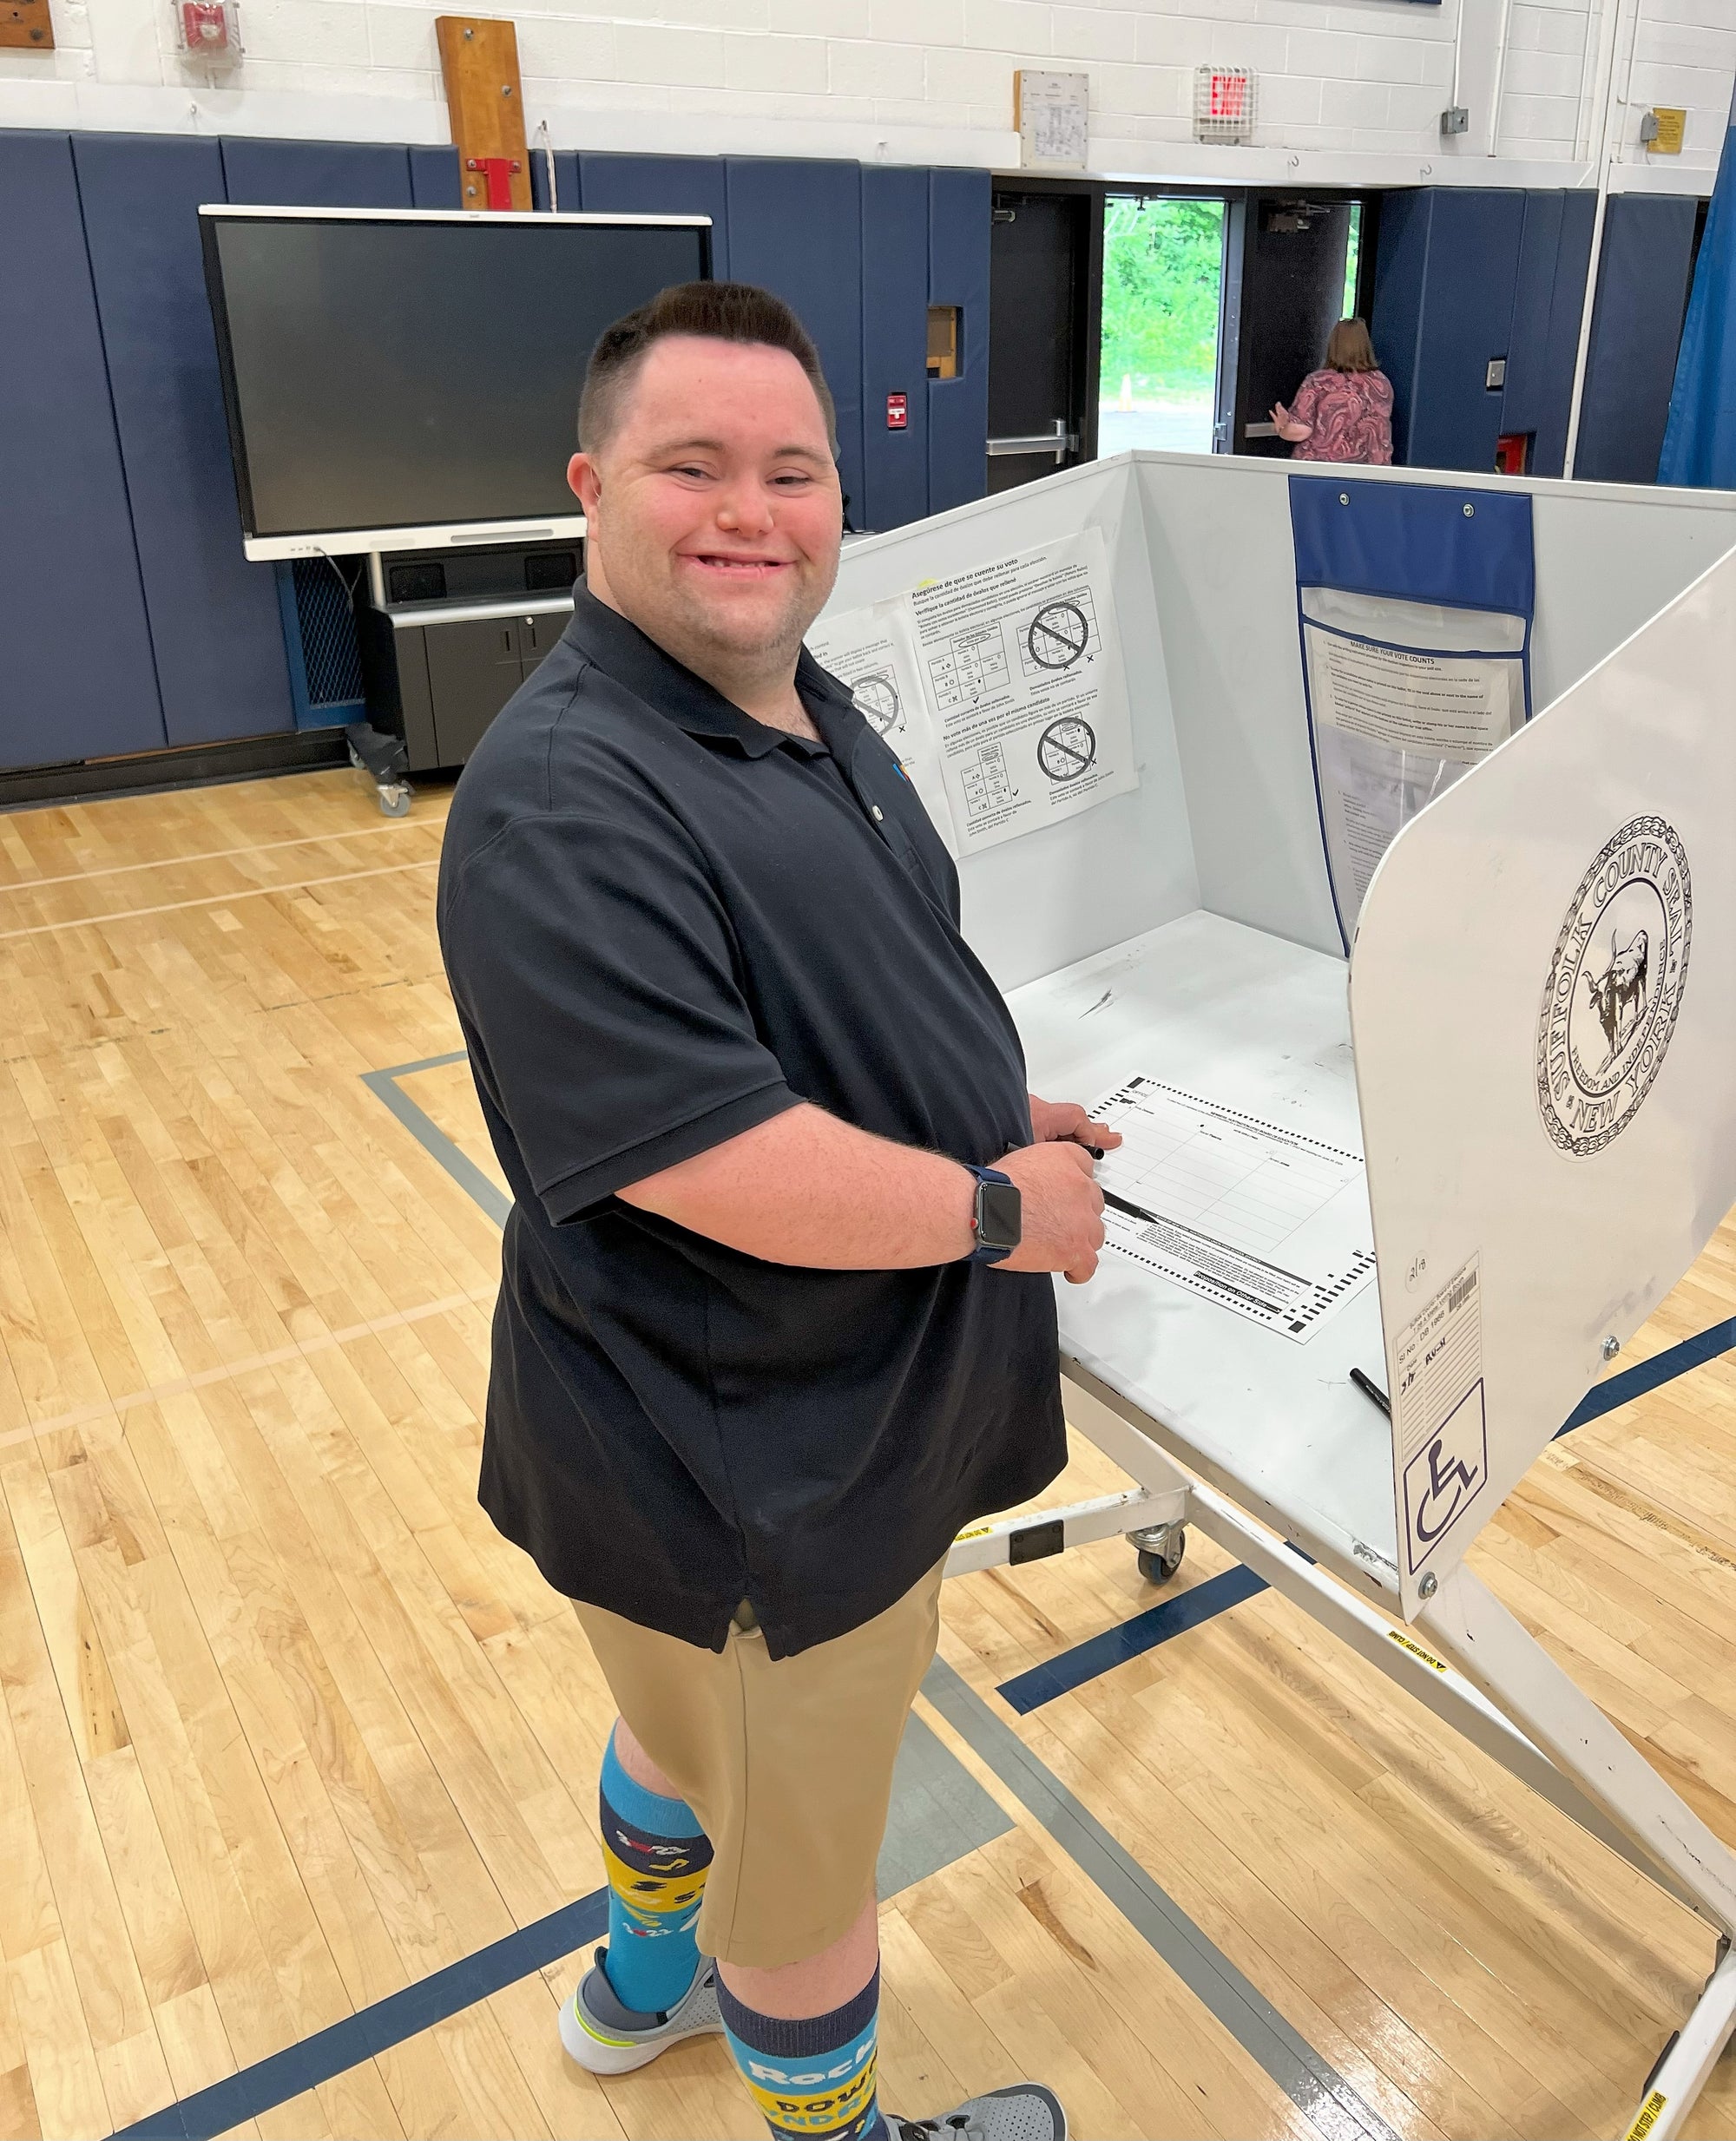 John Makes His Voice Heard by Voting